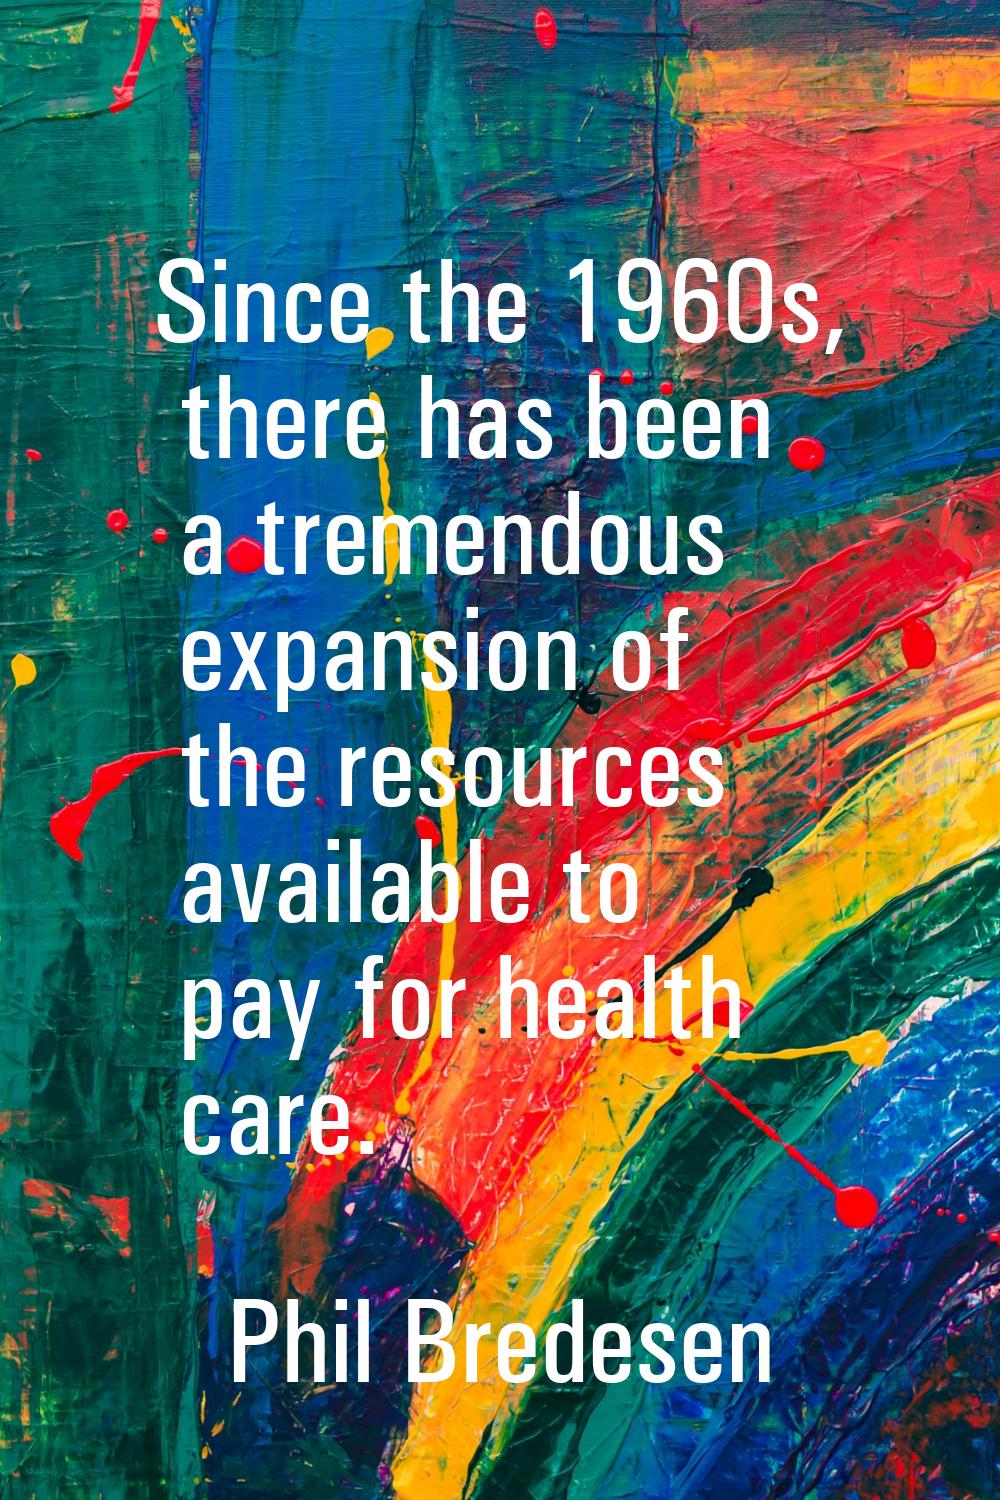 Since the 1960s, there has been a tremendous expansion of the resources available to pay for health